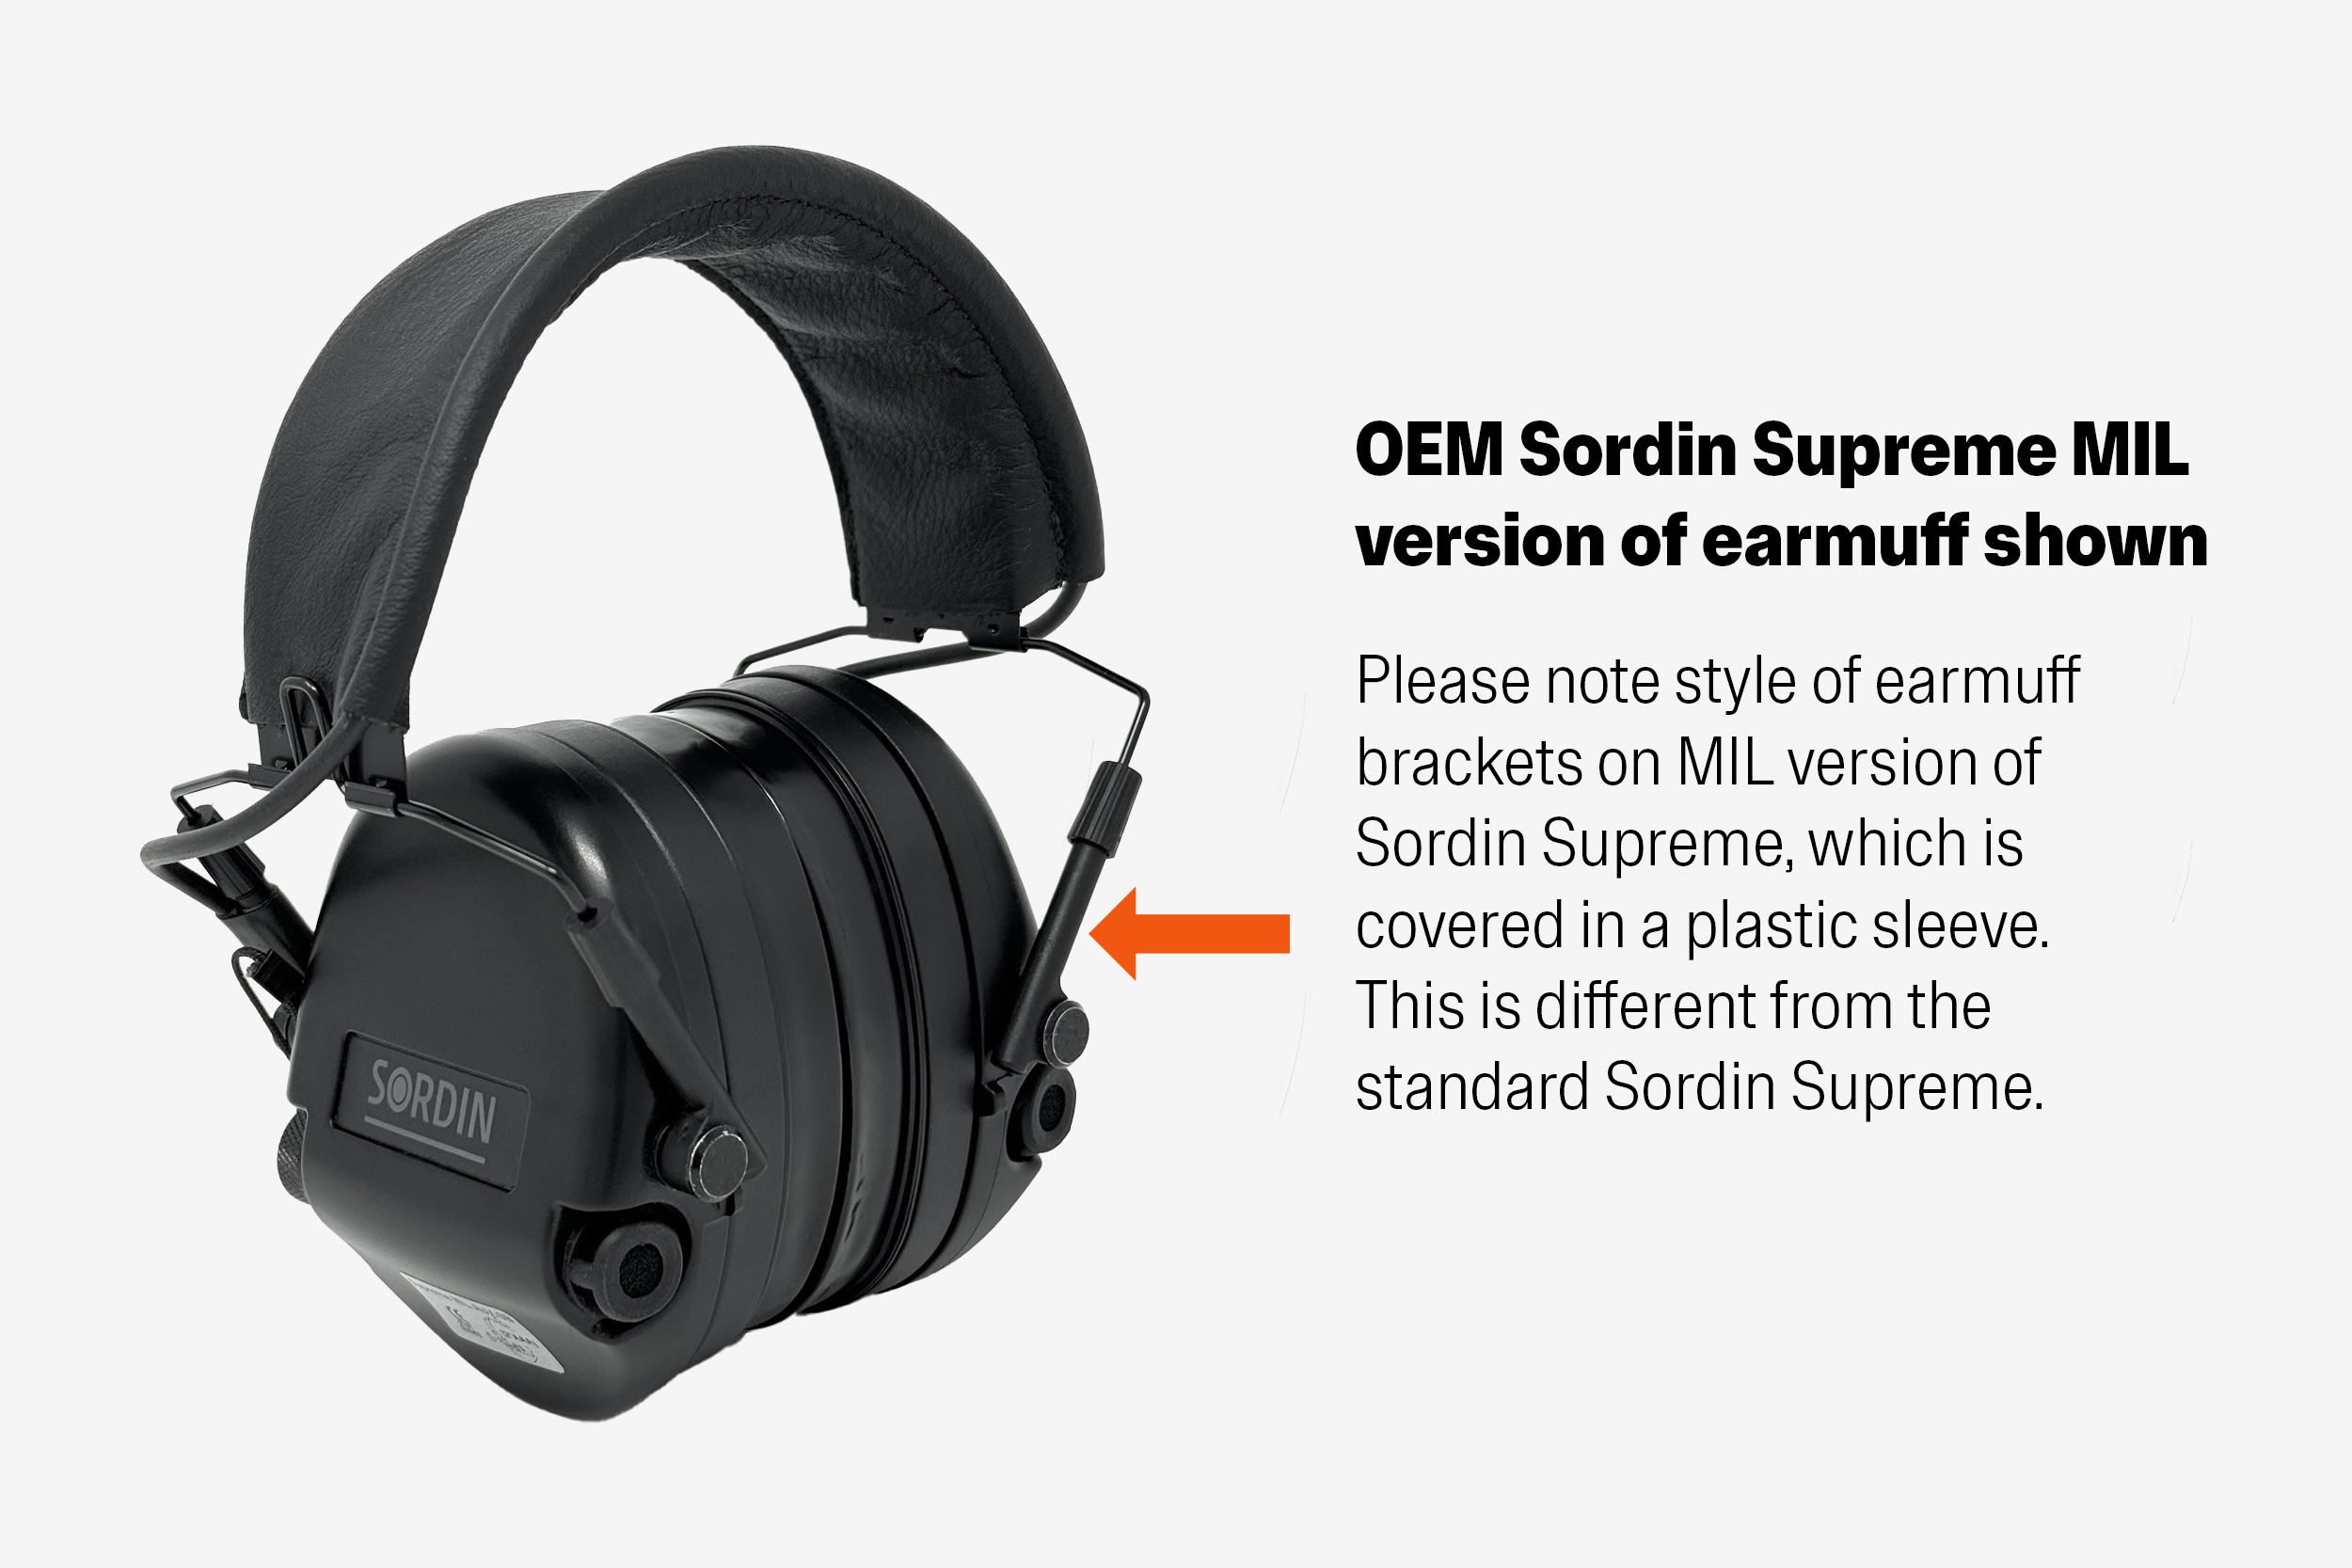 Magna Lens® Snap On Adapter Set for Sordin® Supreme MIL Earmuffs (adds a magnetic connection to Sordin® Supreme MIL earmuffs)